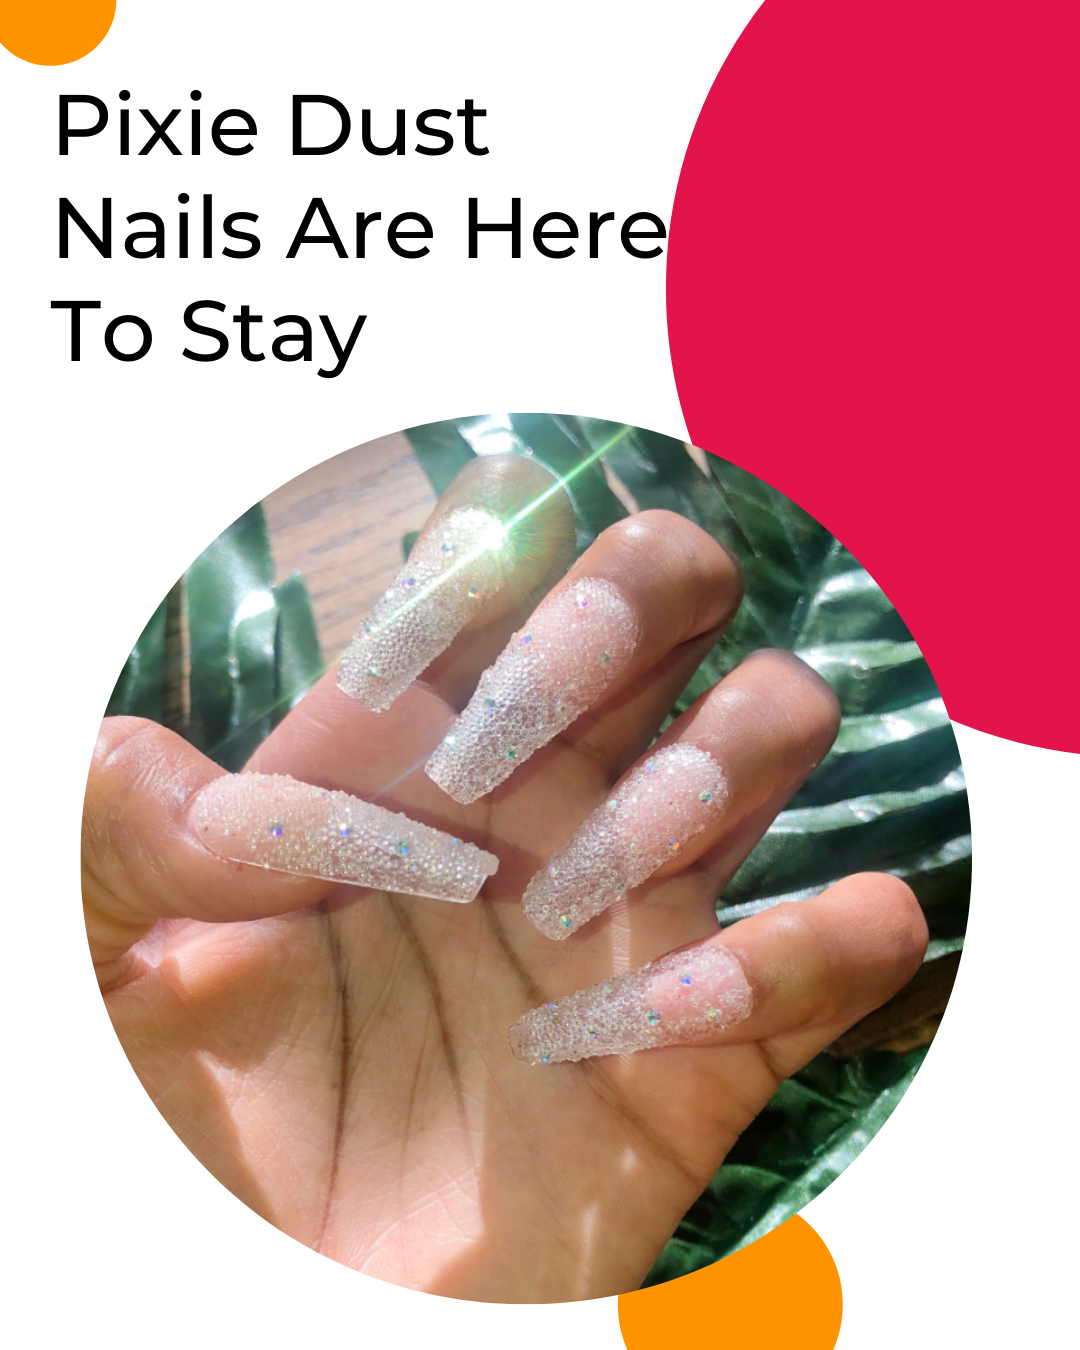 3 Reasons Pixie Dust Nails Are Here to Stay